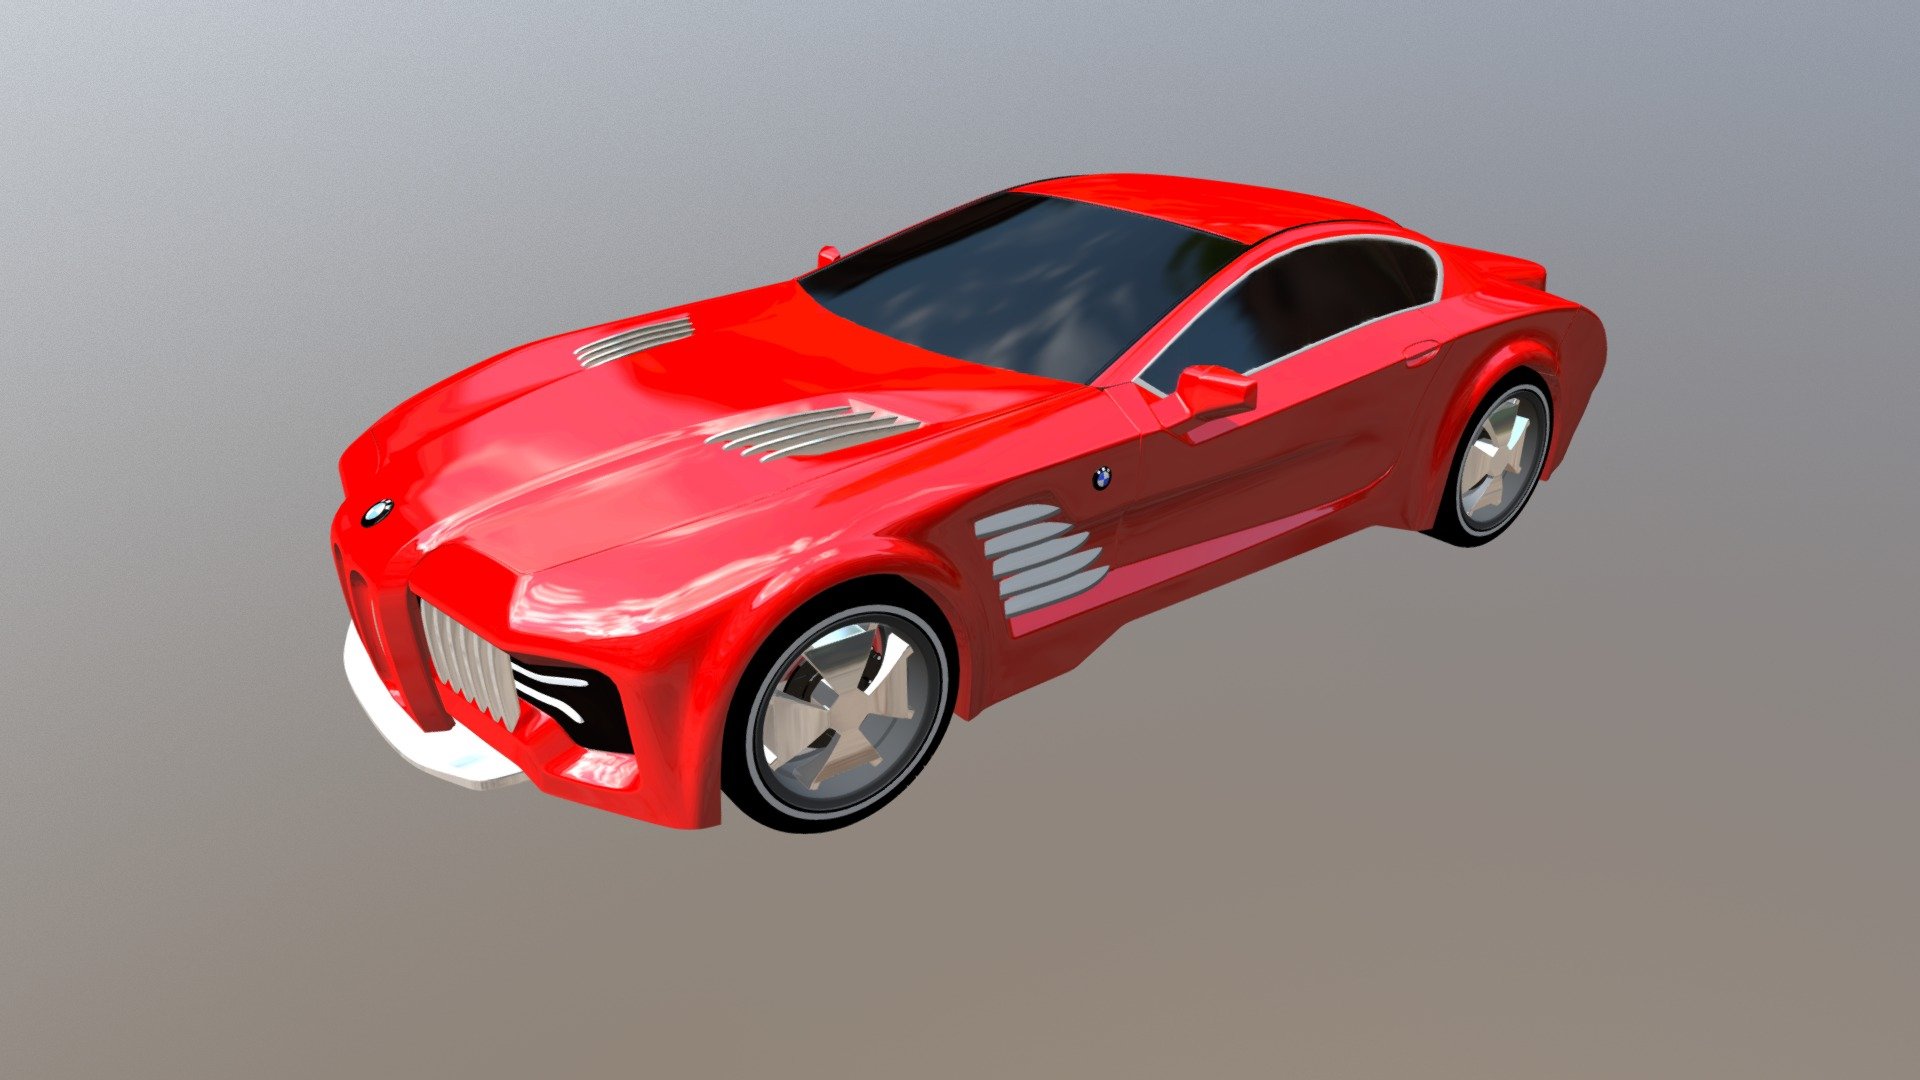 The file story OBJ, STL, ZBR, 

3d car model Designed  for 3ds max  by makulaa - BMW concept car - 3D model by makulaa 3d model